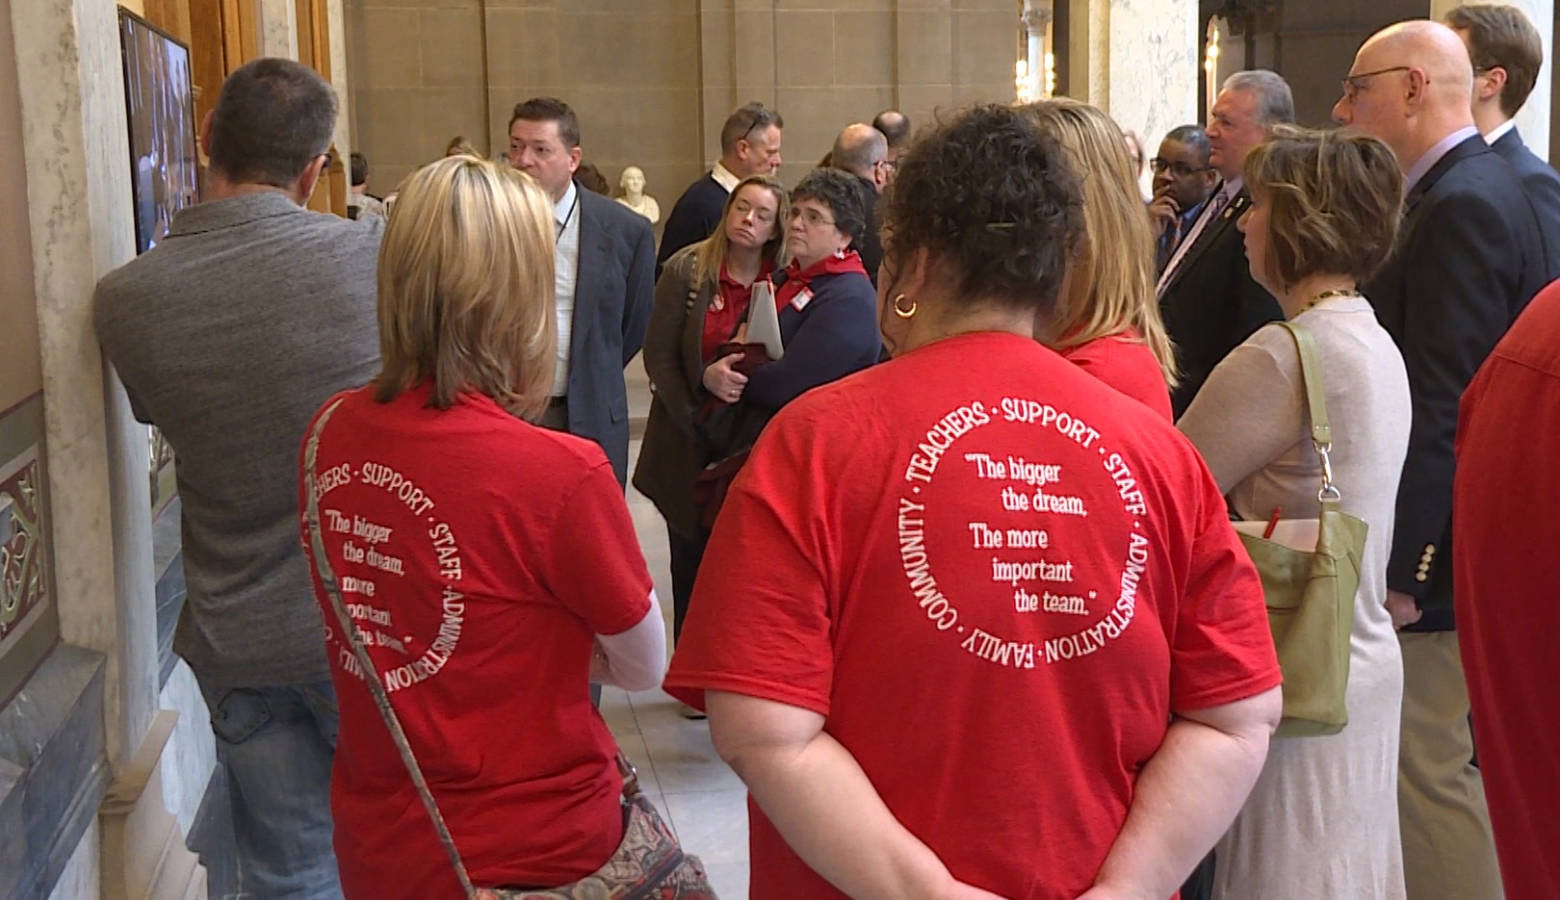 Teachers dressed in red joined other education advocates at a school funding meeting in the statehouse. (Jeanie Lindsay/IPB News)